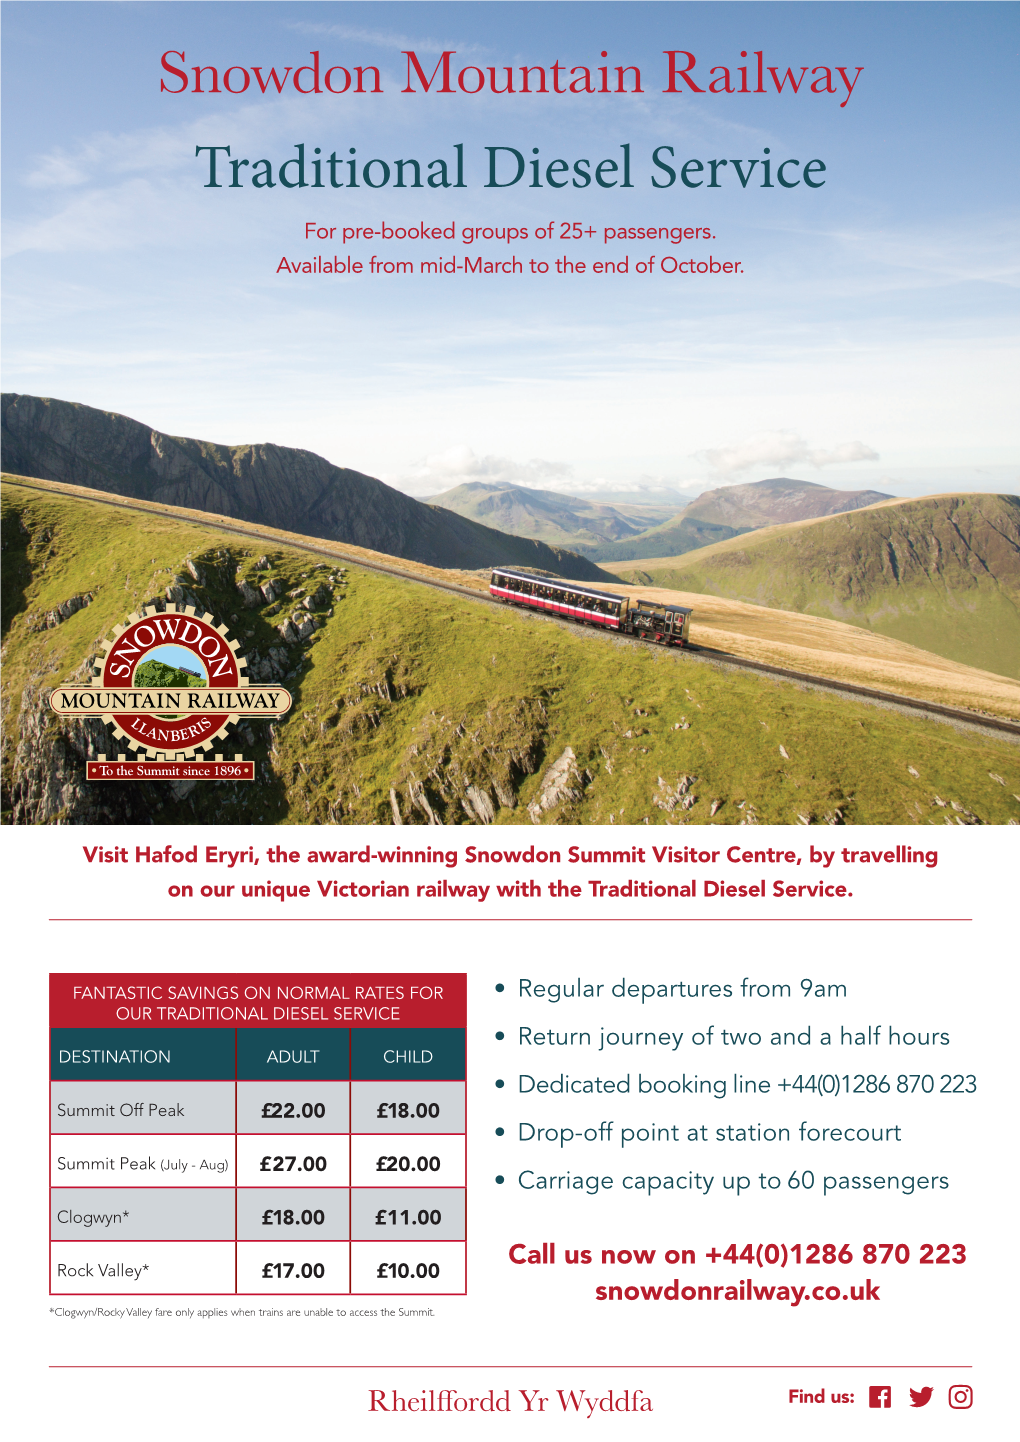 Snowdon Mountain Railway Traditional Diesel Service for Pre-Booked Groups of 25+ Passengers